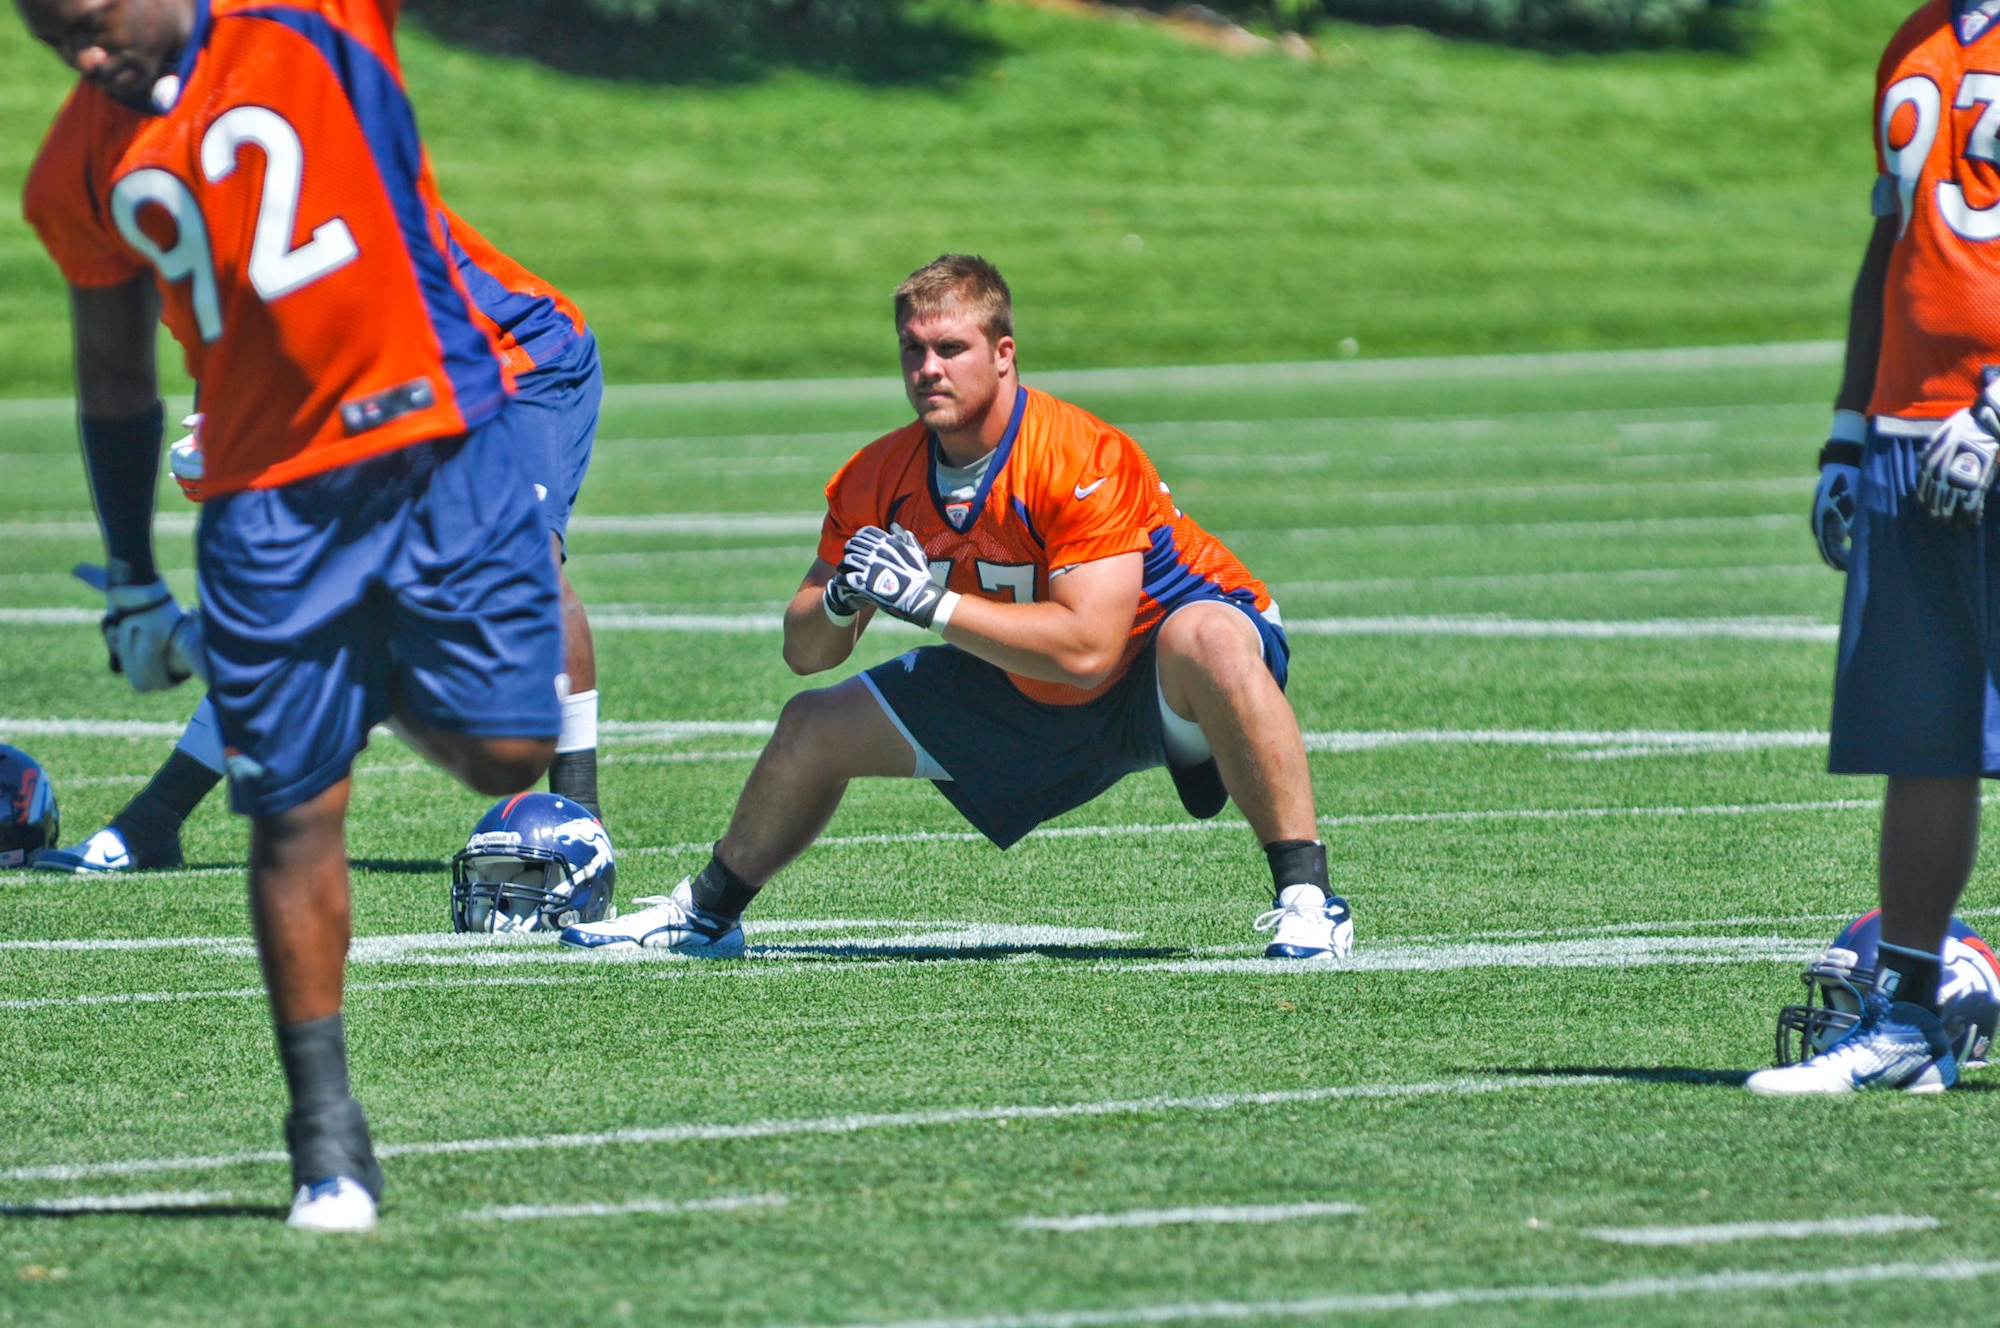 ENGLEWOOD, Colo. – Benjamin Garland stretches during a Denver Broncos mini-camp session June 13, 2012. Garland graduated with the Air Force Academy Class of 2010 and began his Air Force career as a strength and conditioning coach for the academy. He is currently assigned to the 140 Wing Public Affairs Office, Colorado Air National Guard. (U.S. Air Force photo by Senior Airman Christopher Gross)